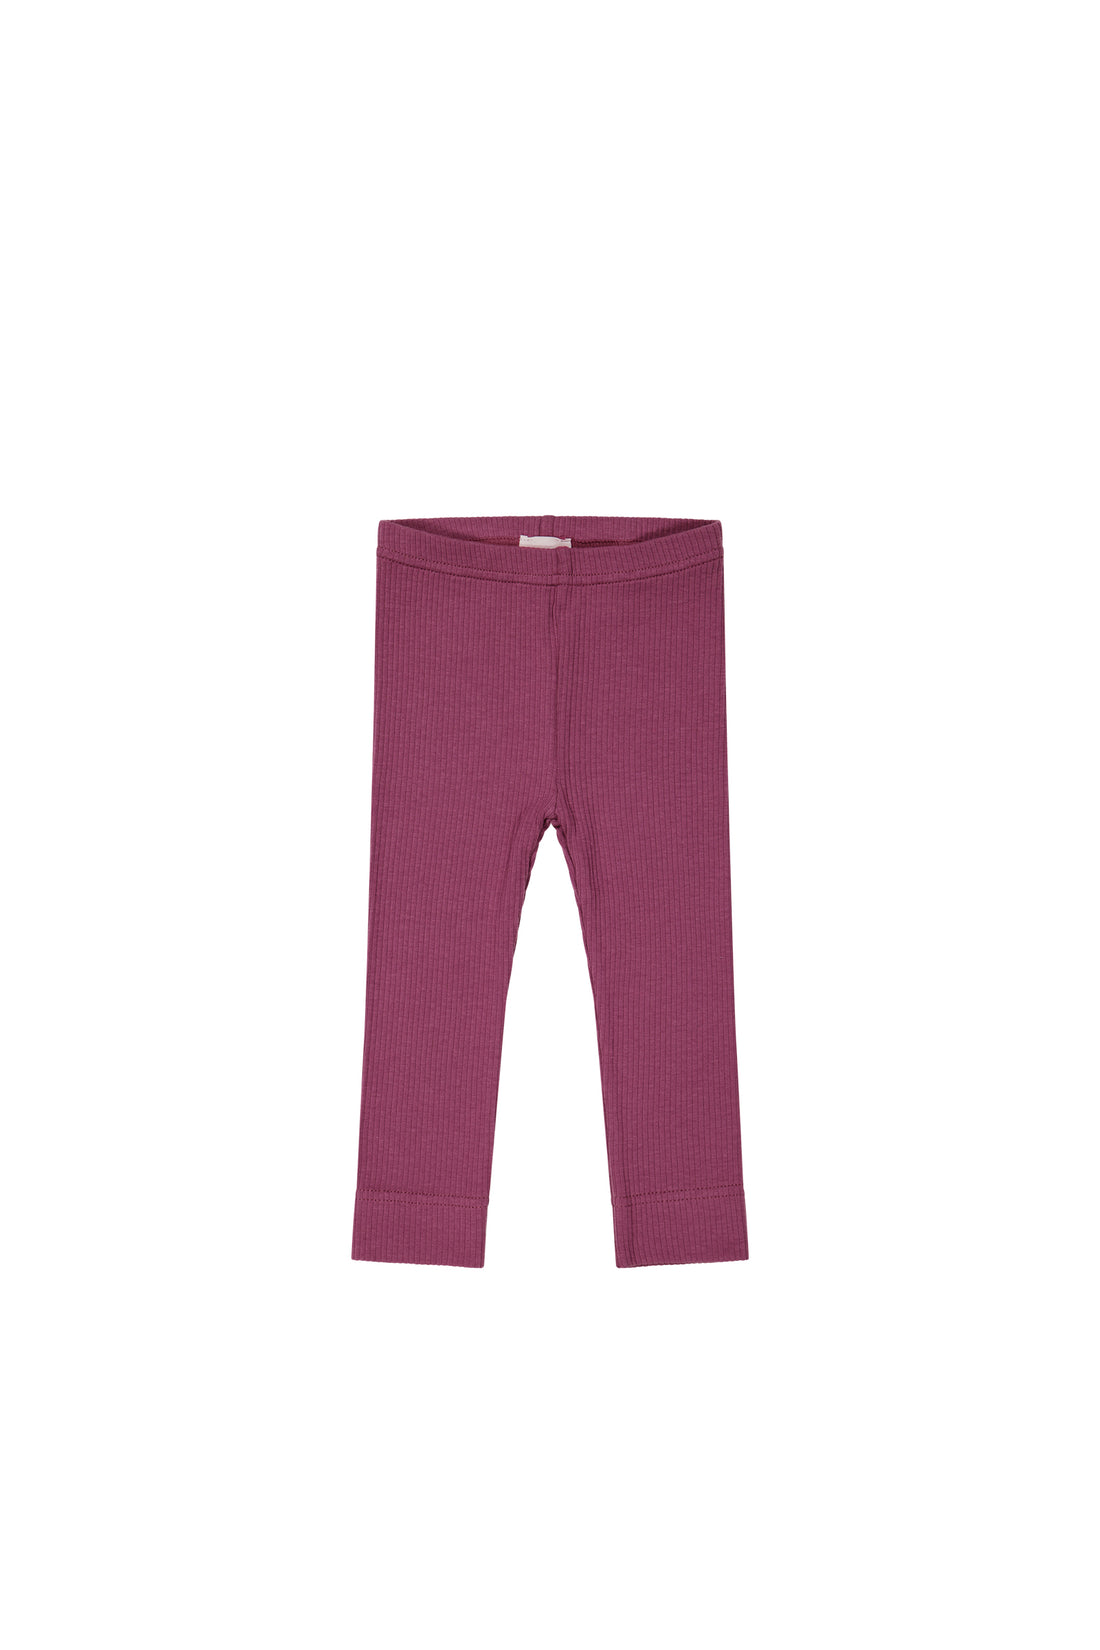 Organic Cotton Modal Everyday Legging - Berry Compote Childrens Legging from Jamie Kay NZ